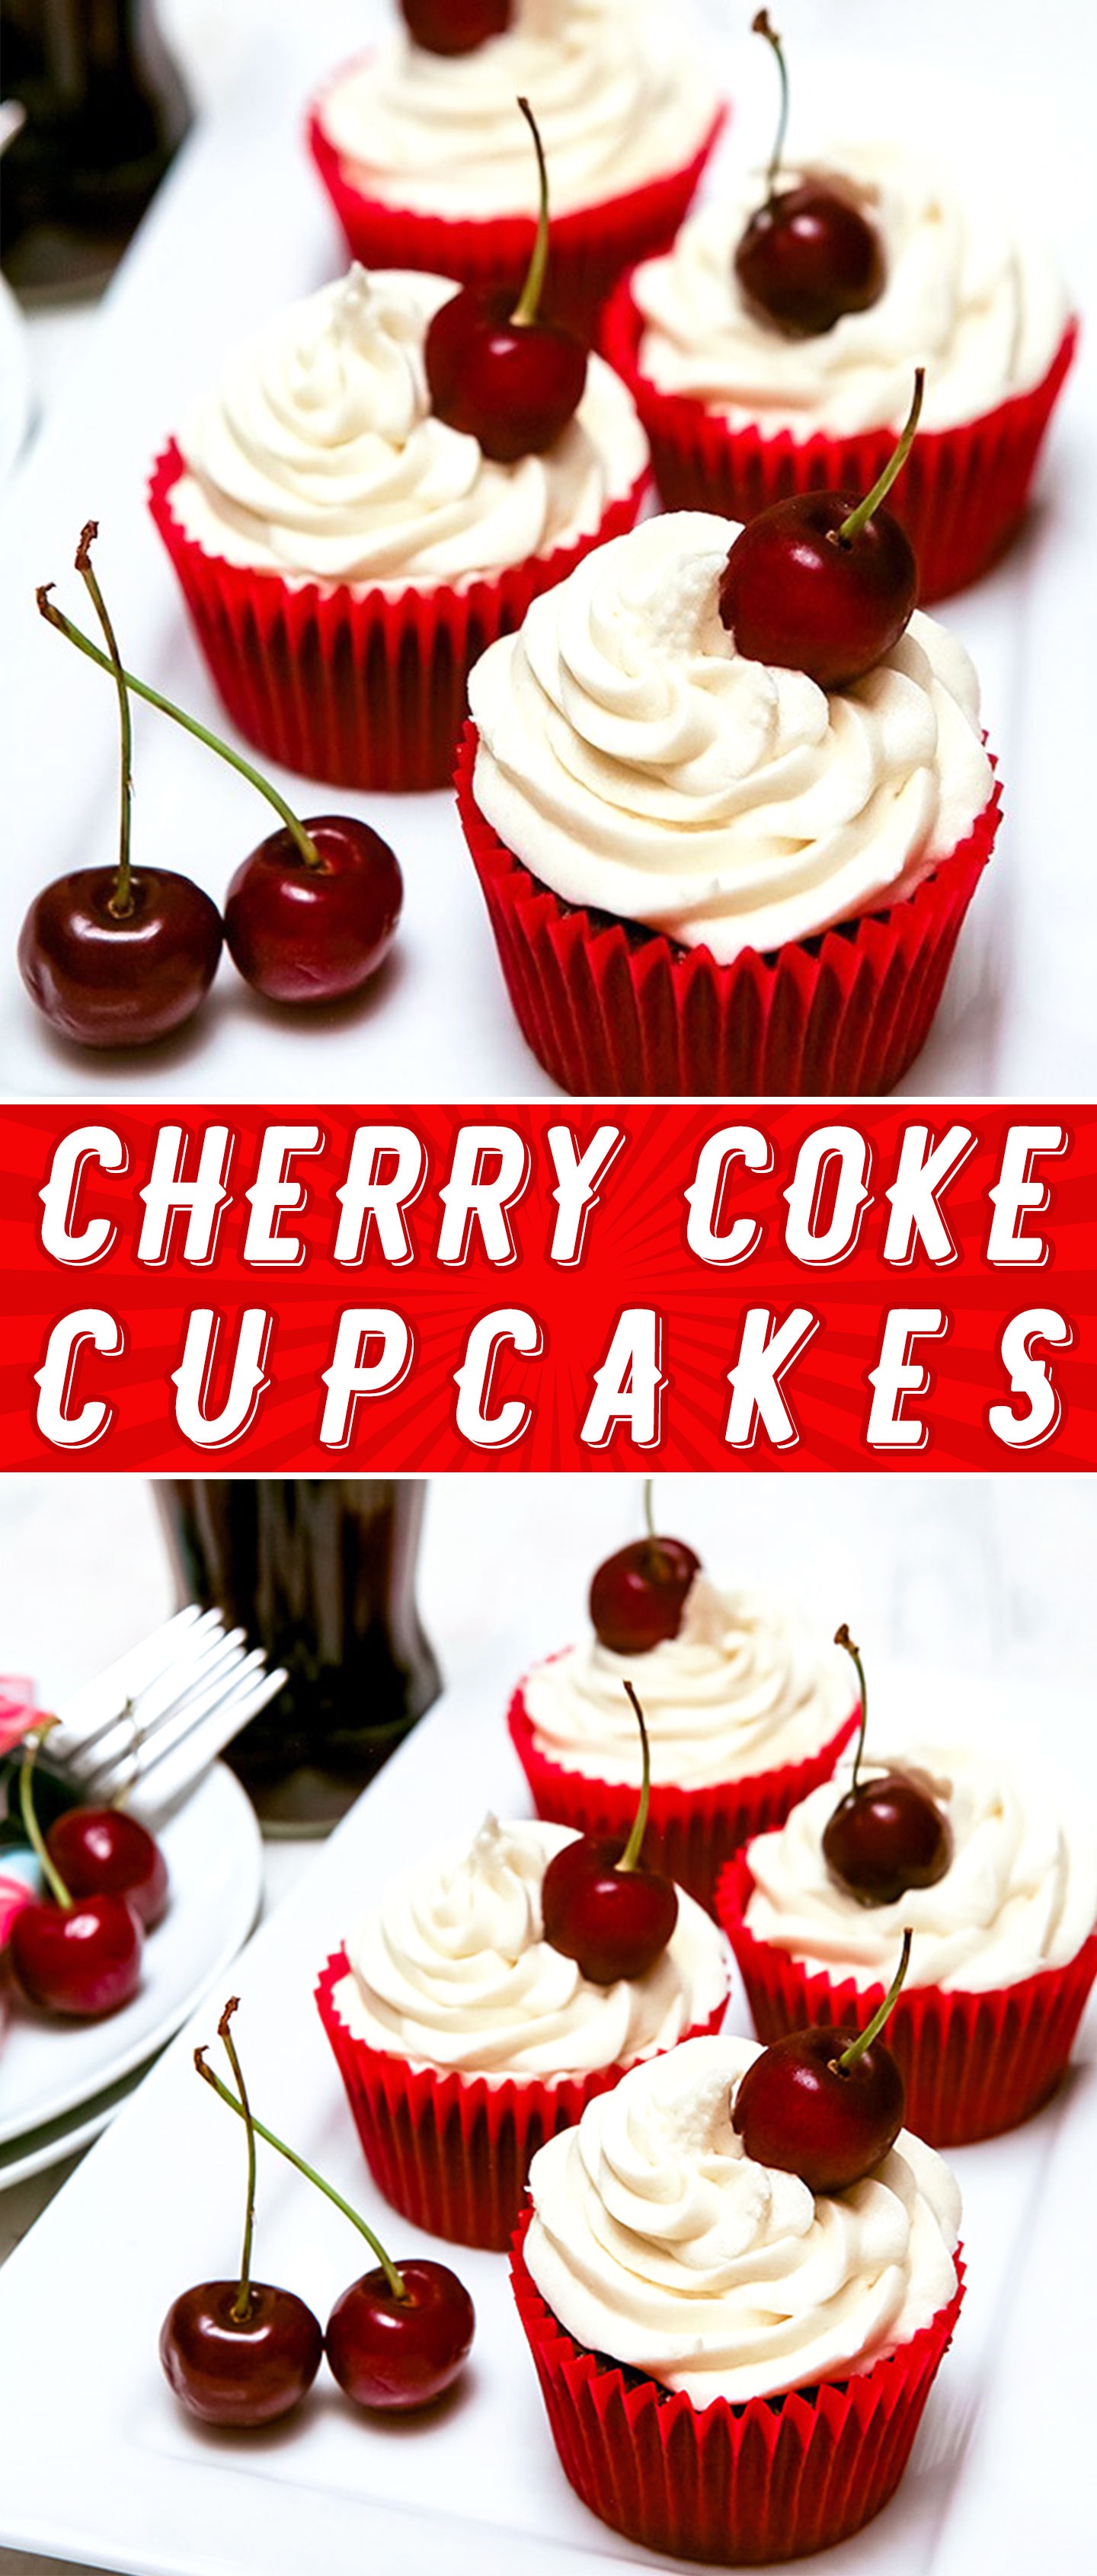 Cherry Coke Cupcakes Recipe by Sweet2EatBaking.com | These Cherry Coke cupcakes have cherry coke in the batter, making for a super moist flavourful cupcake. You can really taste the Cherry Coke flavour in these cupcakes.